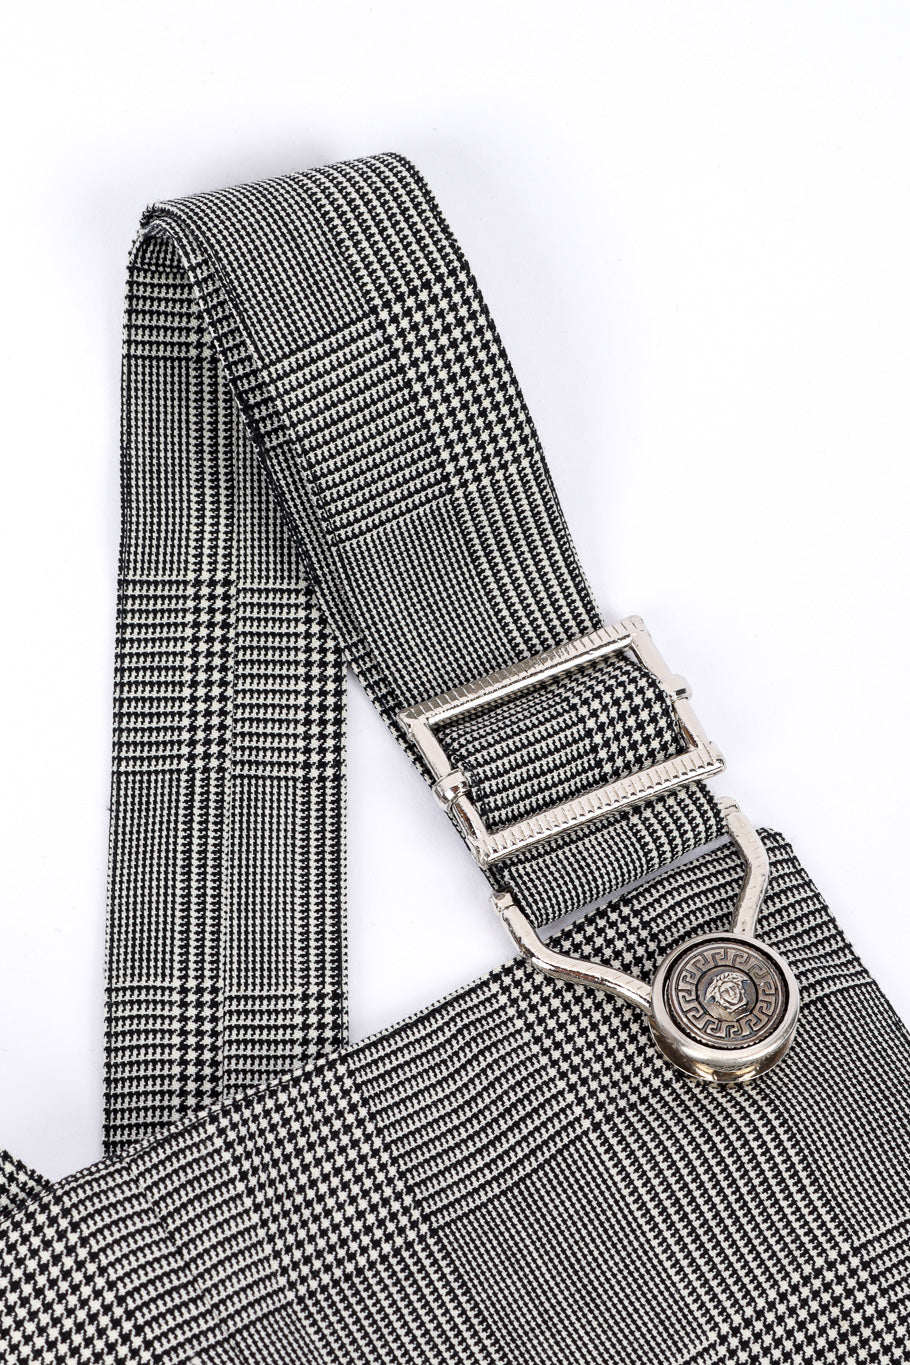 Houndstooth Overall Jumpsuit by Gianni Versace strap button close  @recessla